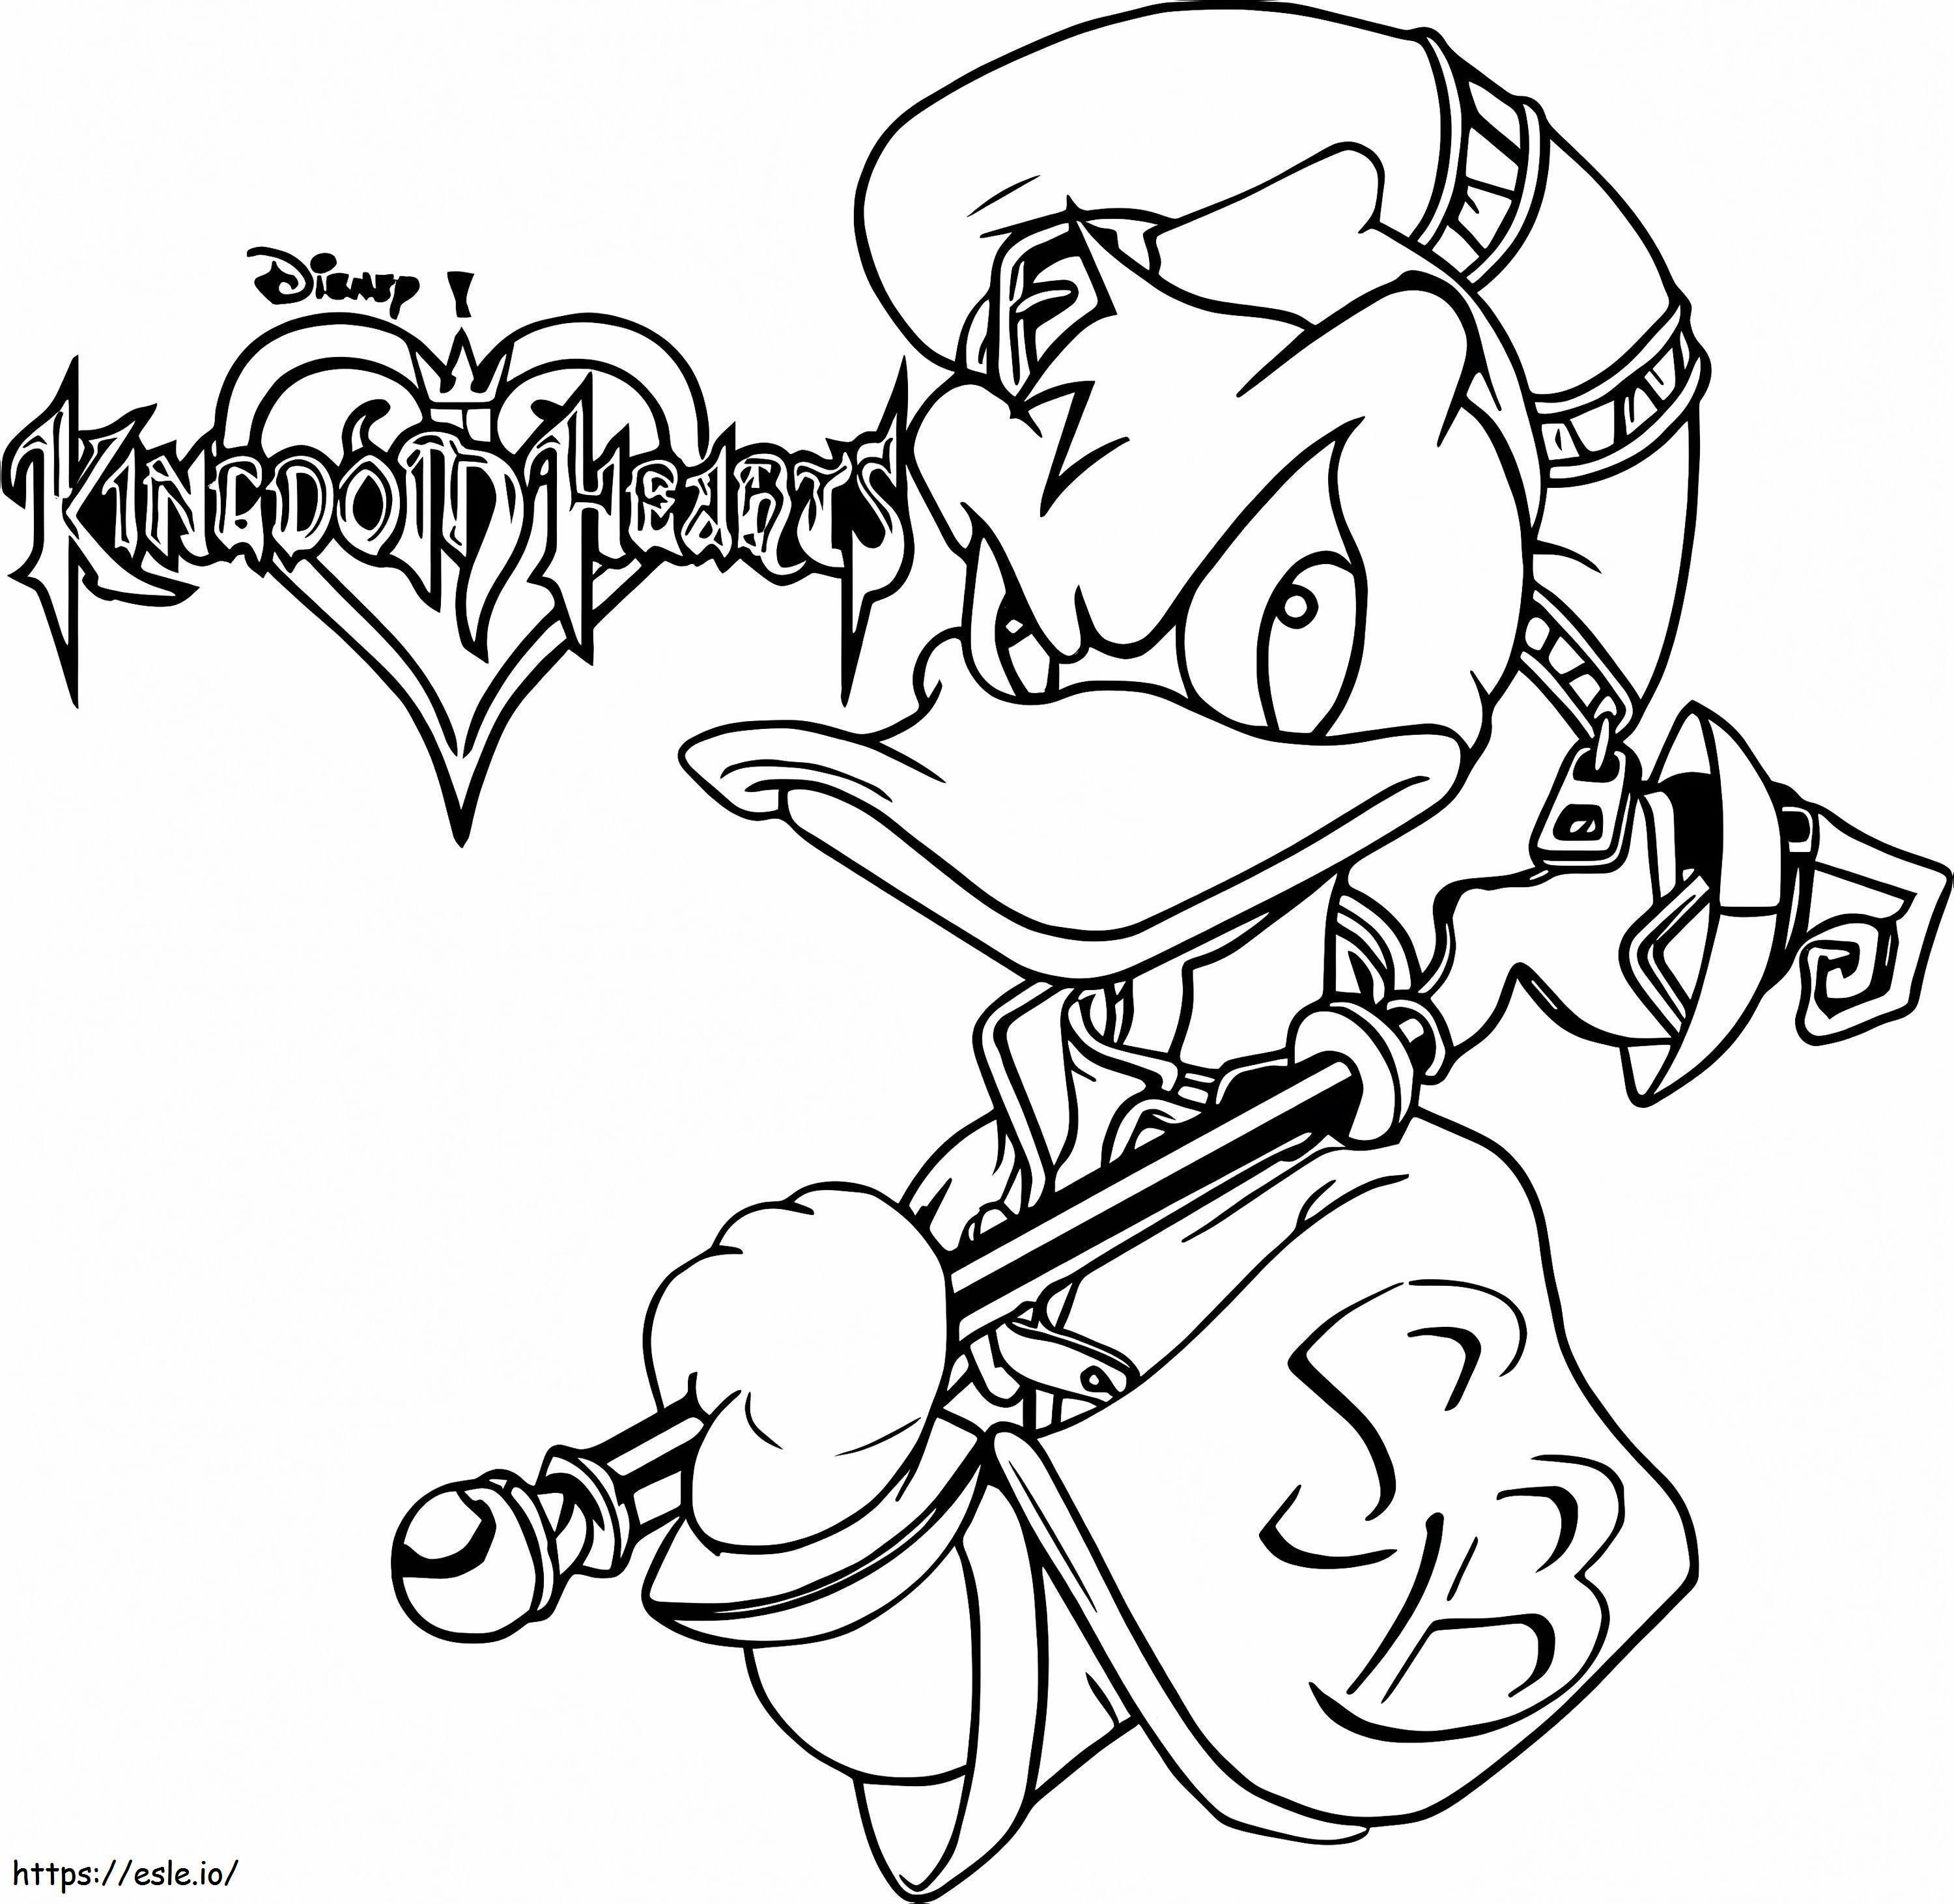 Donlad Duck From Kingdom Hearts coloring page